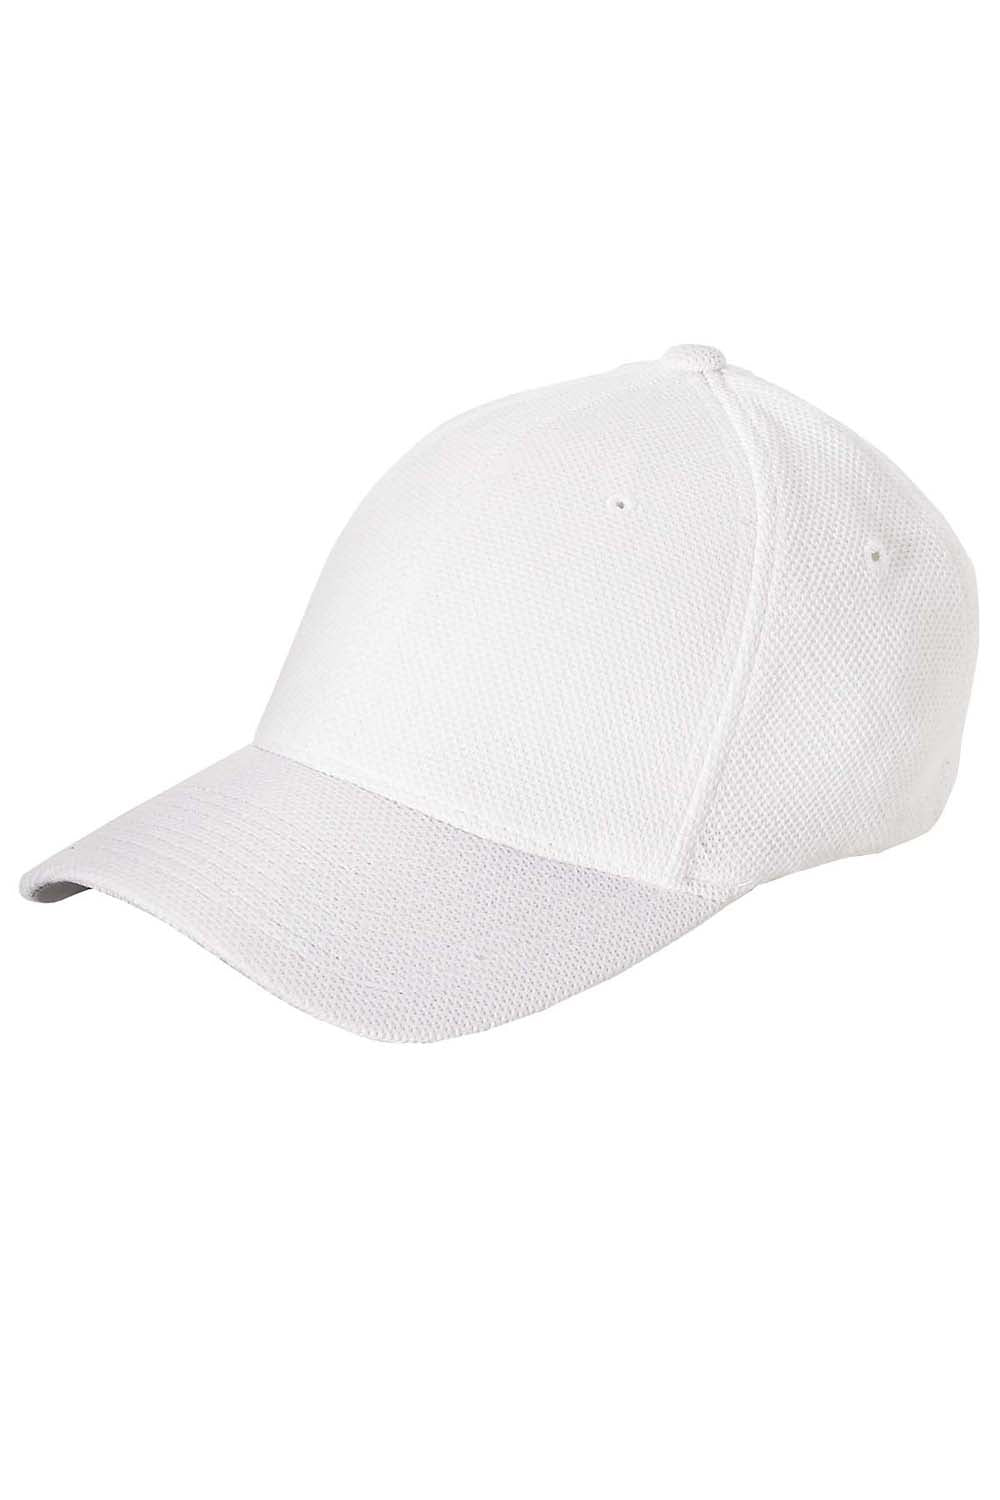 Flexfit 6577CD Mens Cool & Dry Moisture Wicking Stretch Fit Hat White Front